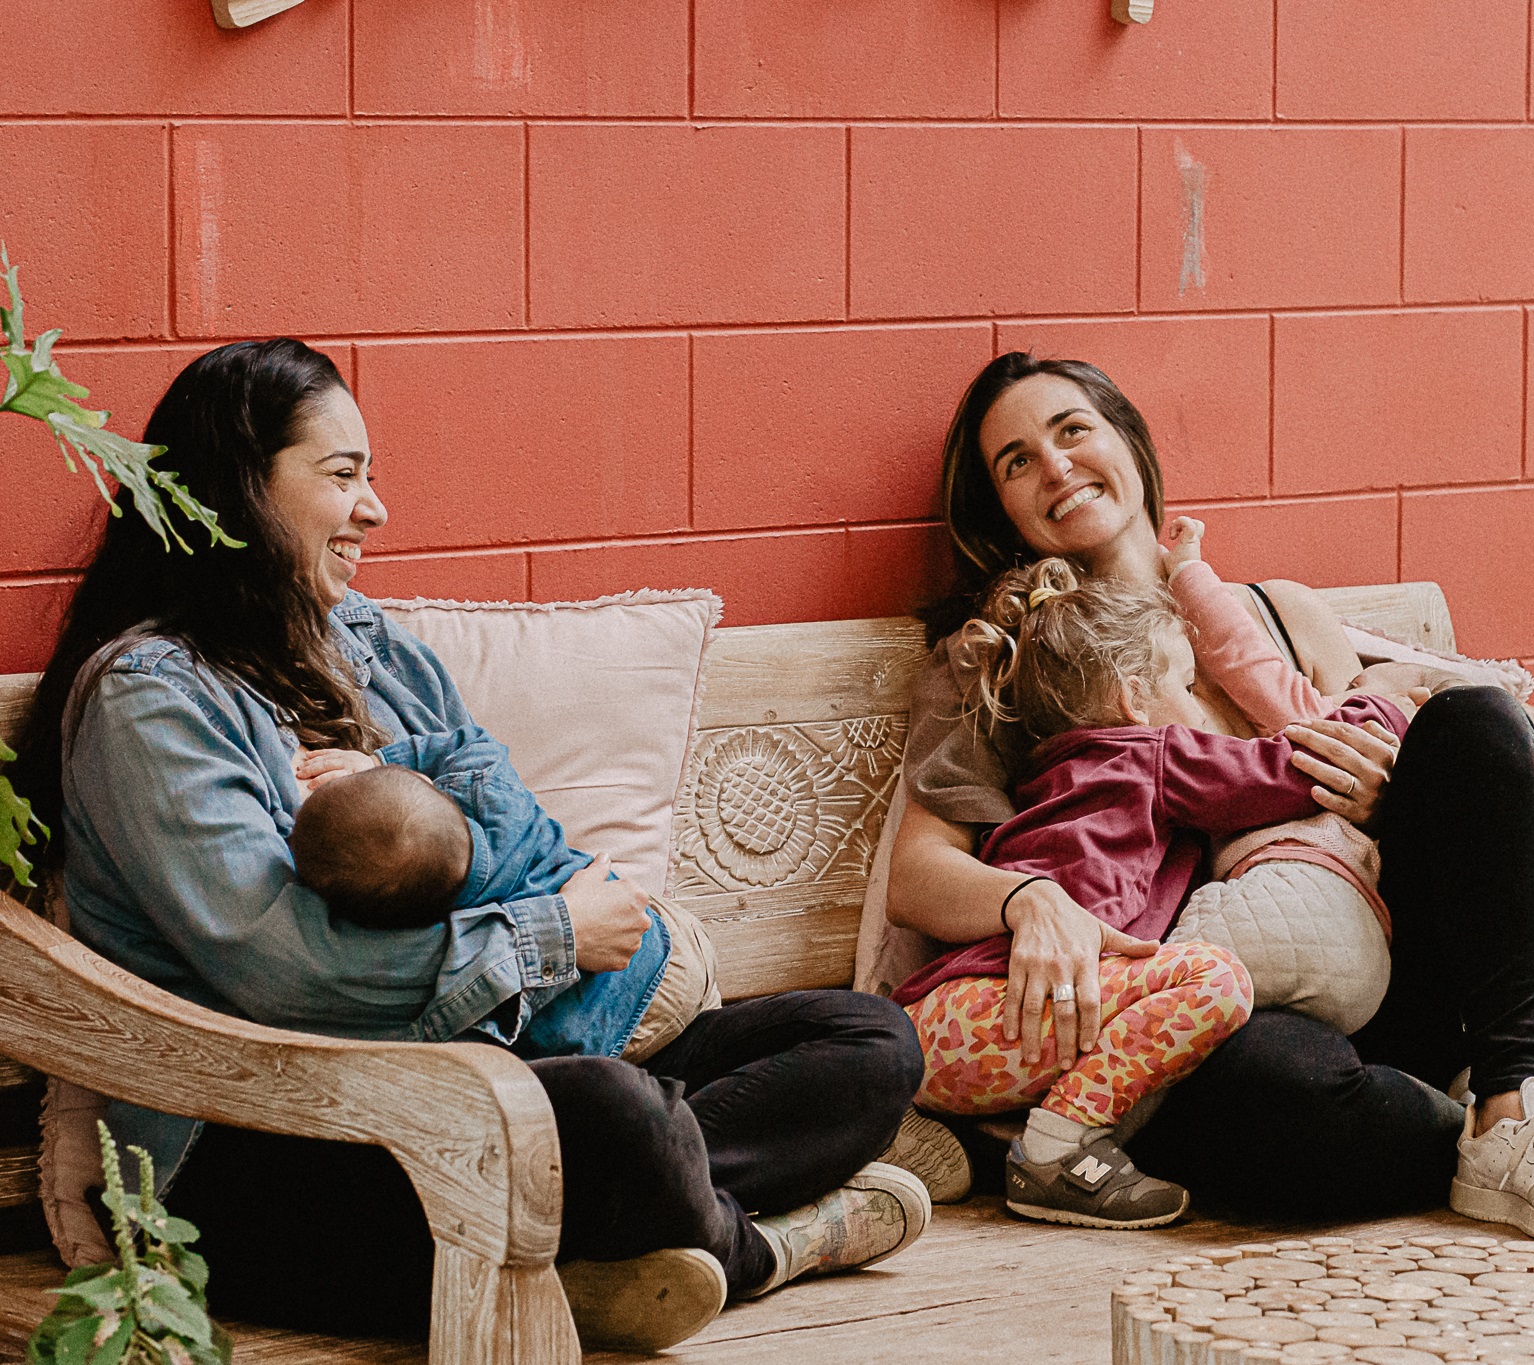 two women sitting together breastfeeding and smiling